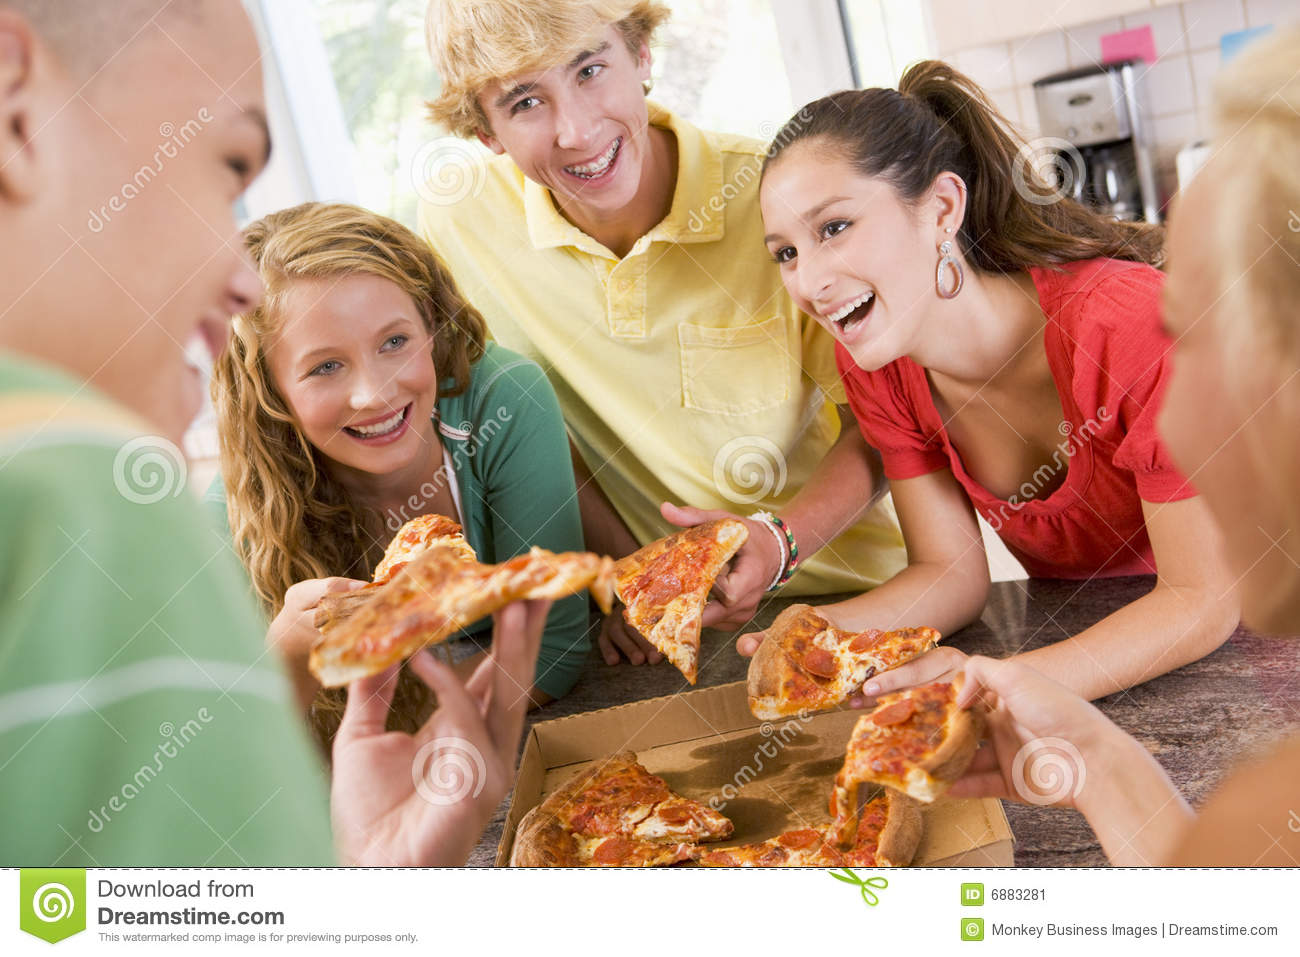 Group Of Teenagers Eating Pizza Stock Image   Image  6883281